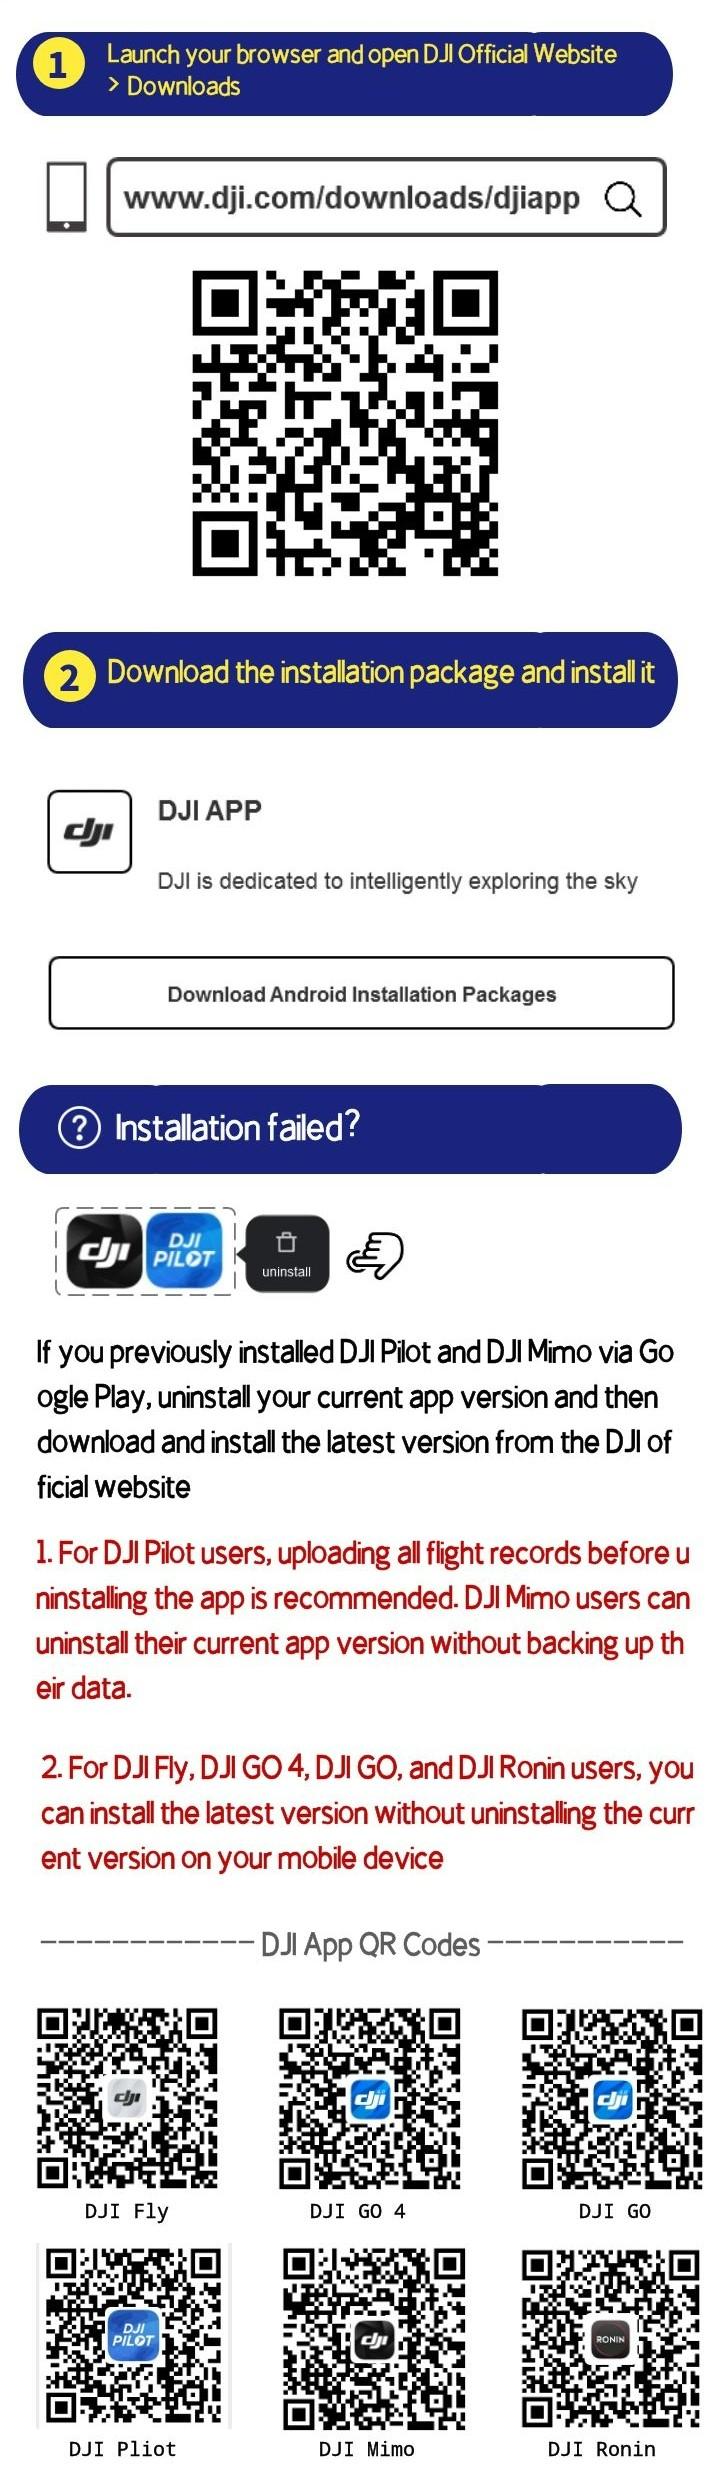 DJI recommends Android 12 users upgrade product apps